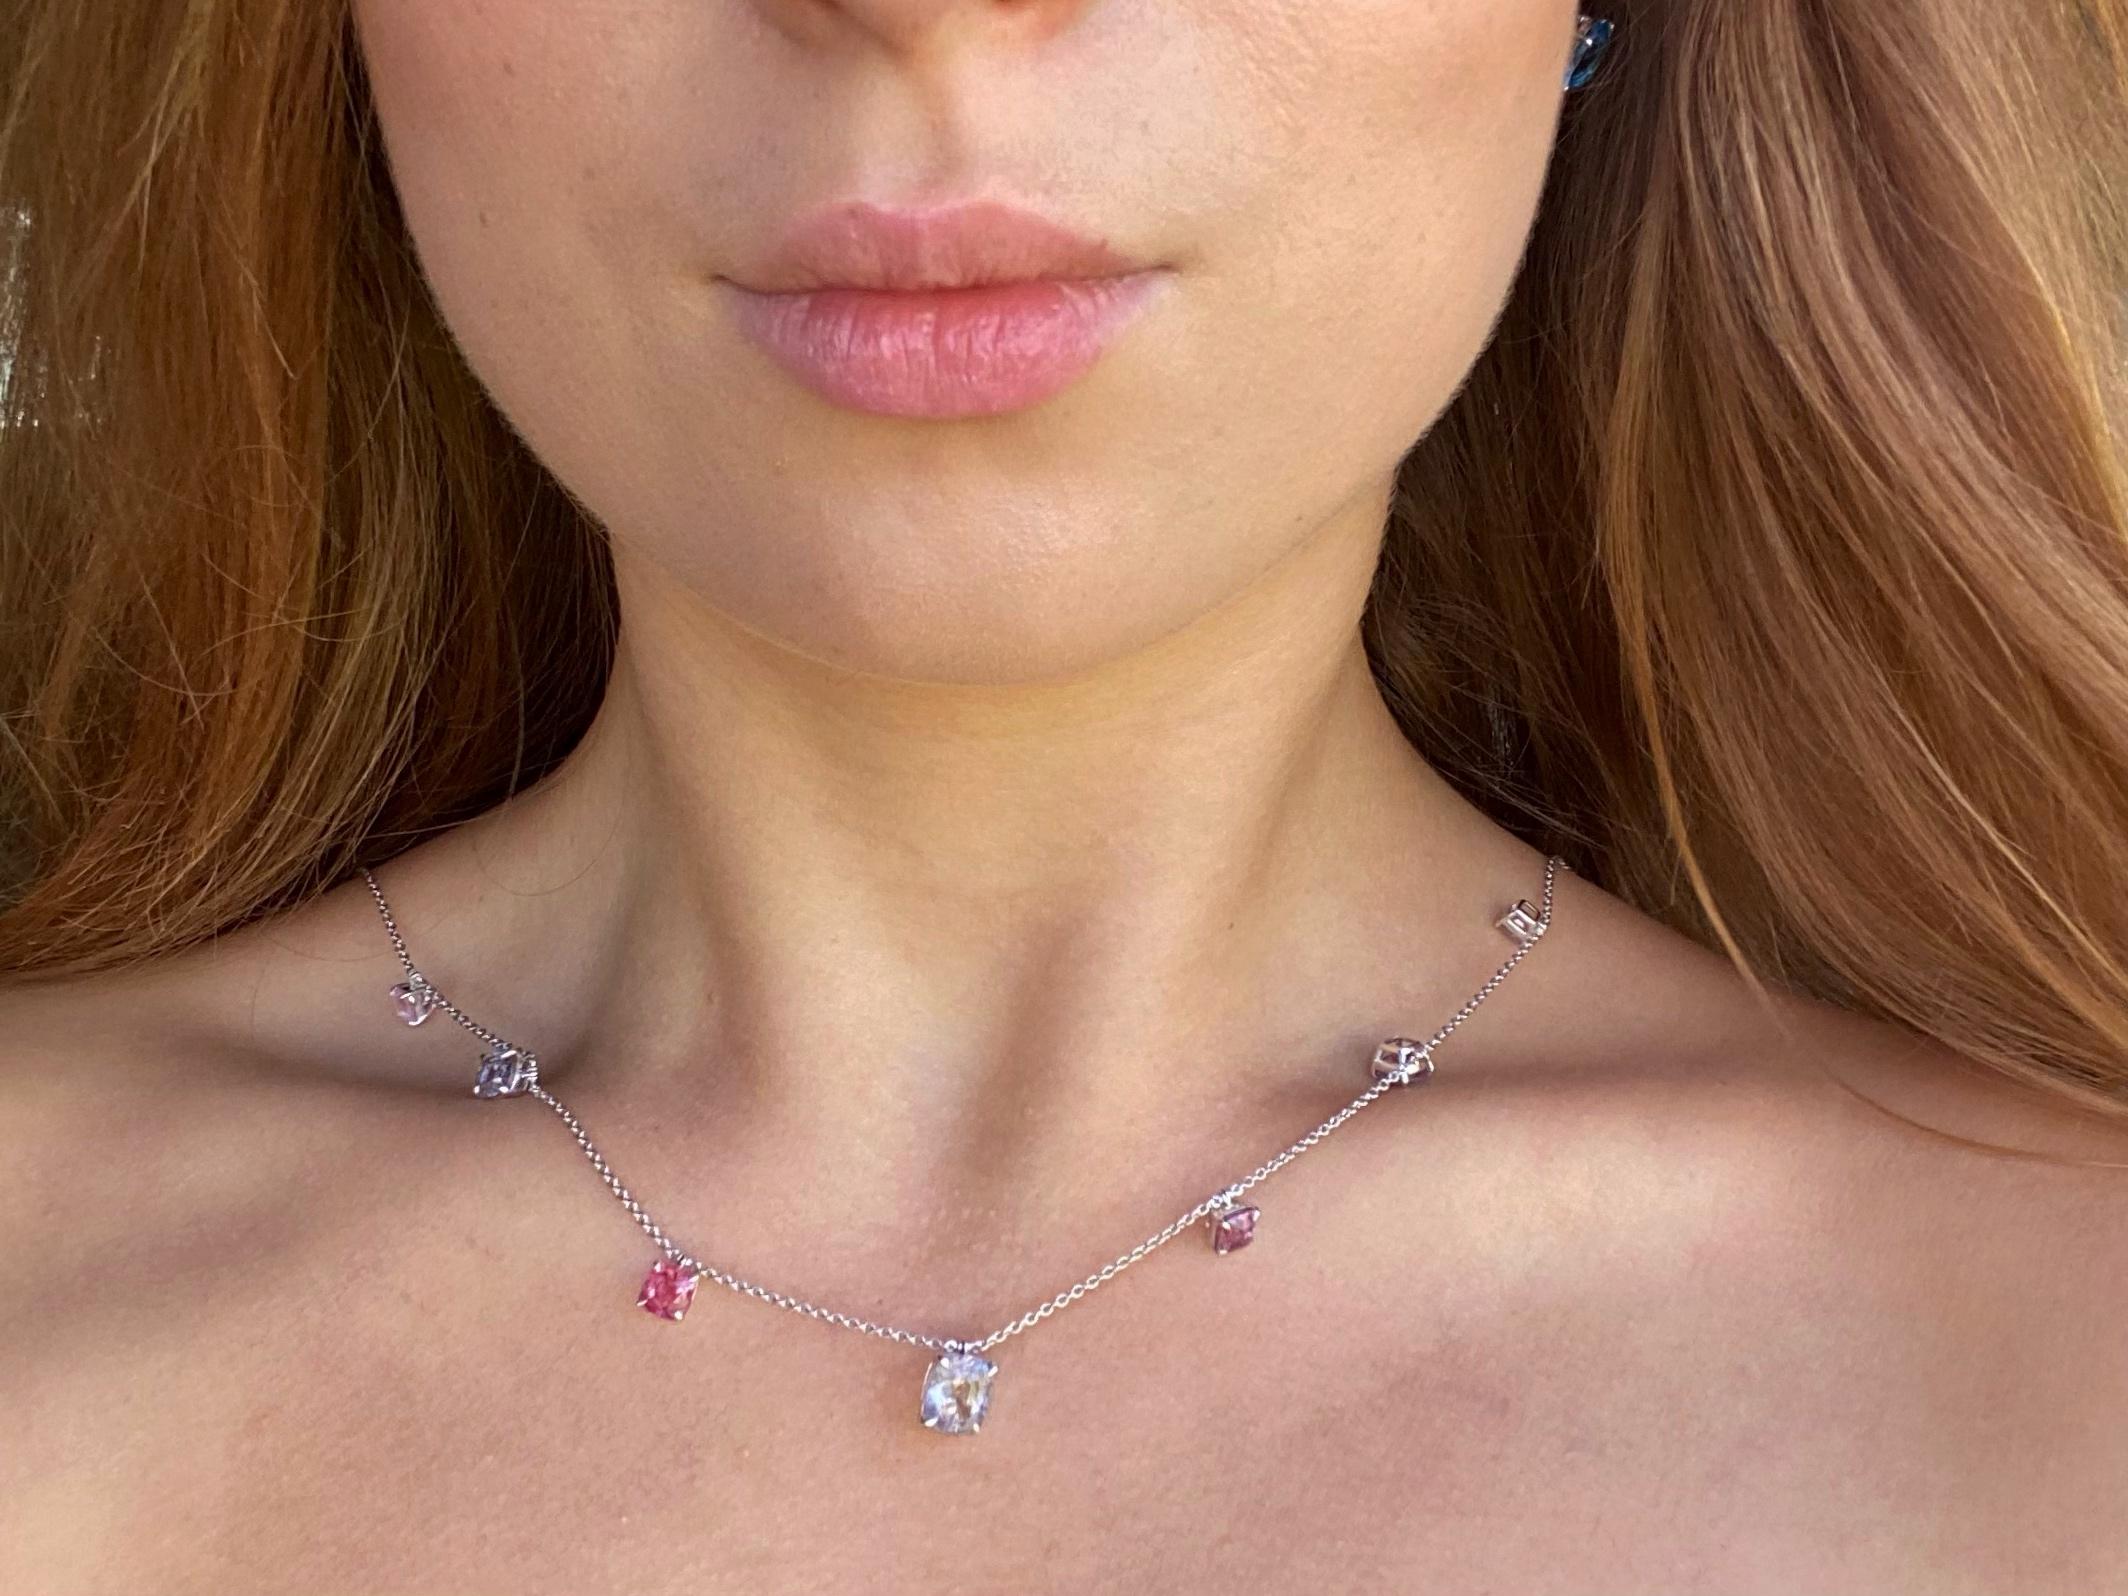 An elegant necklace will add that final touch to your outfit. The 18K multicolored spinel white gold link chain with adjustable clasp will make a worthy addition to your collection of designer accessories.

These 7 radiant cut spinels with a diverse